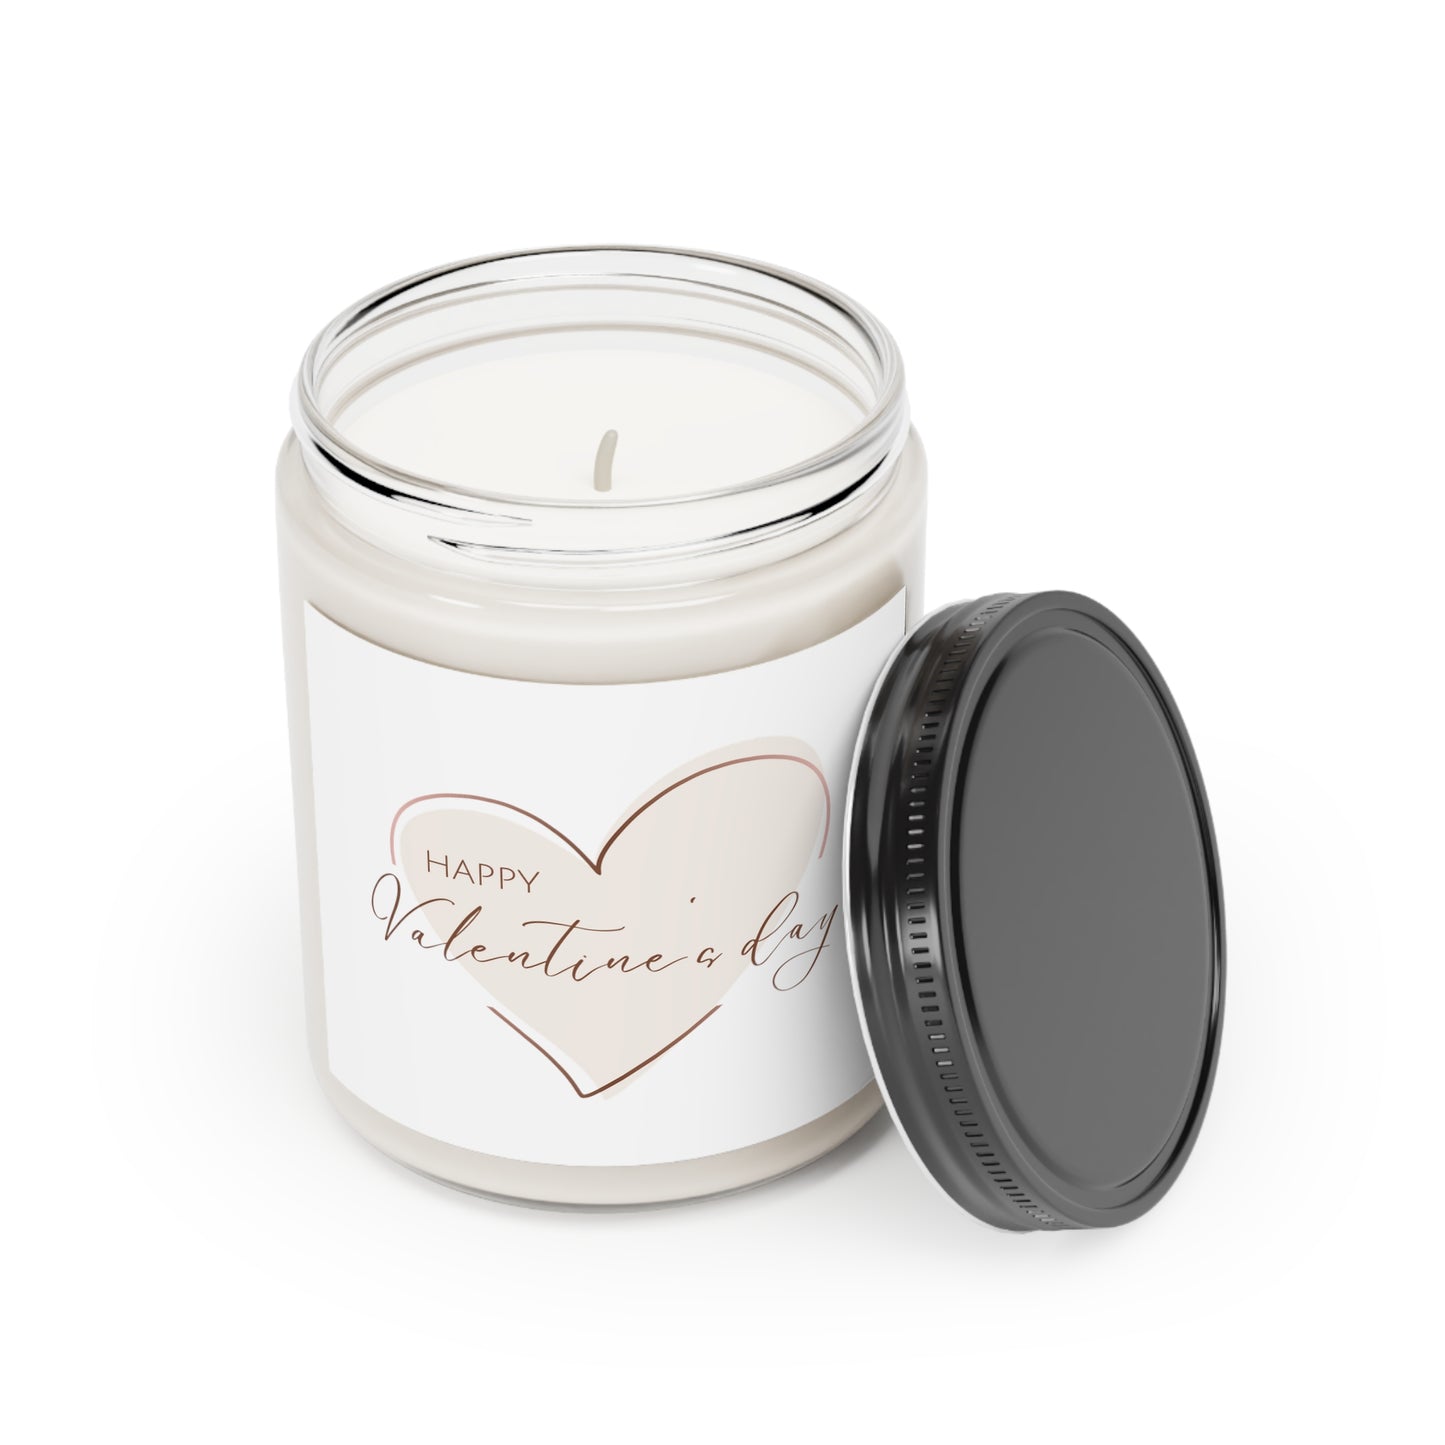 Gift for Her, Valentine's Scented Candle, Happy Valentine's Day with Heart Printed Scanted Candles